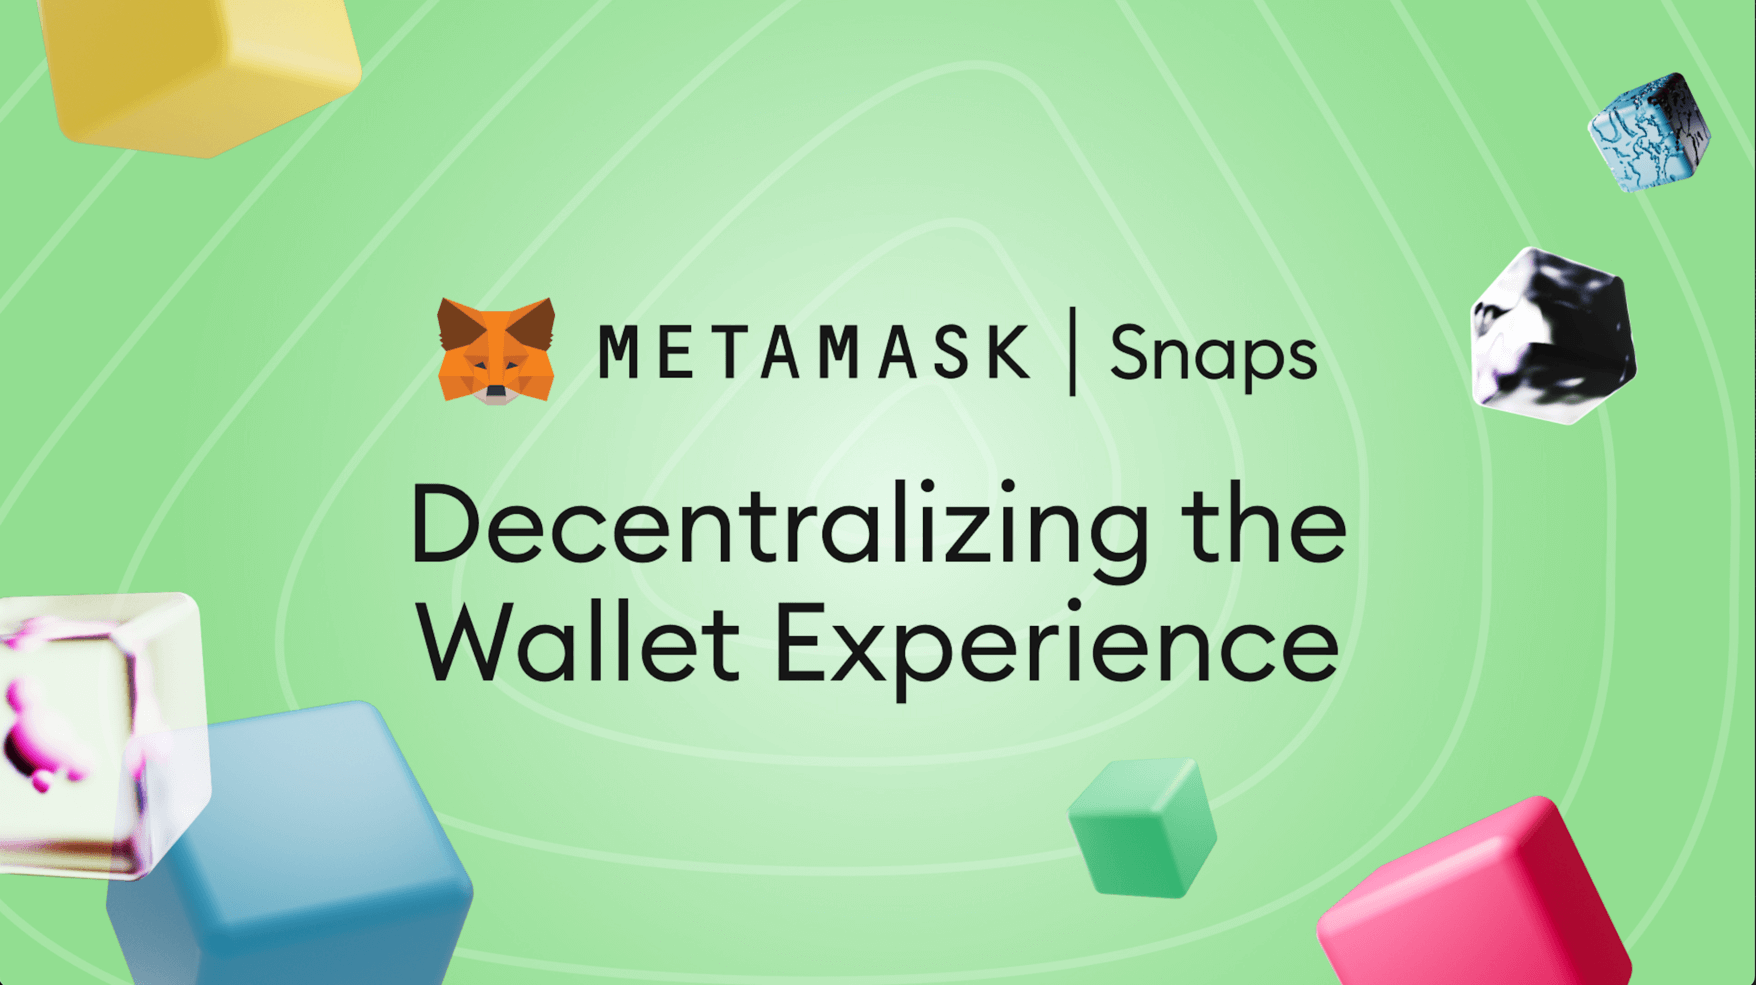 Customize your wallet with MetaMask Snaps